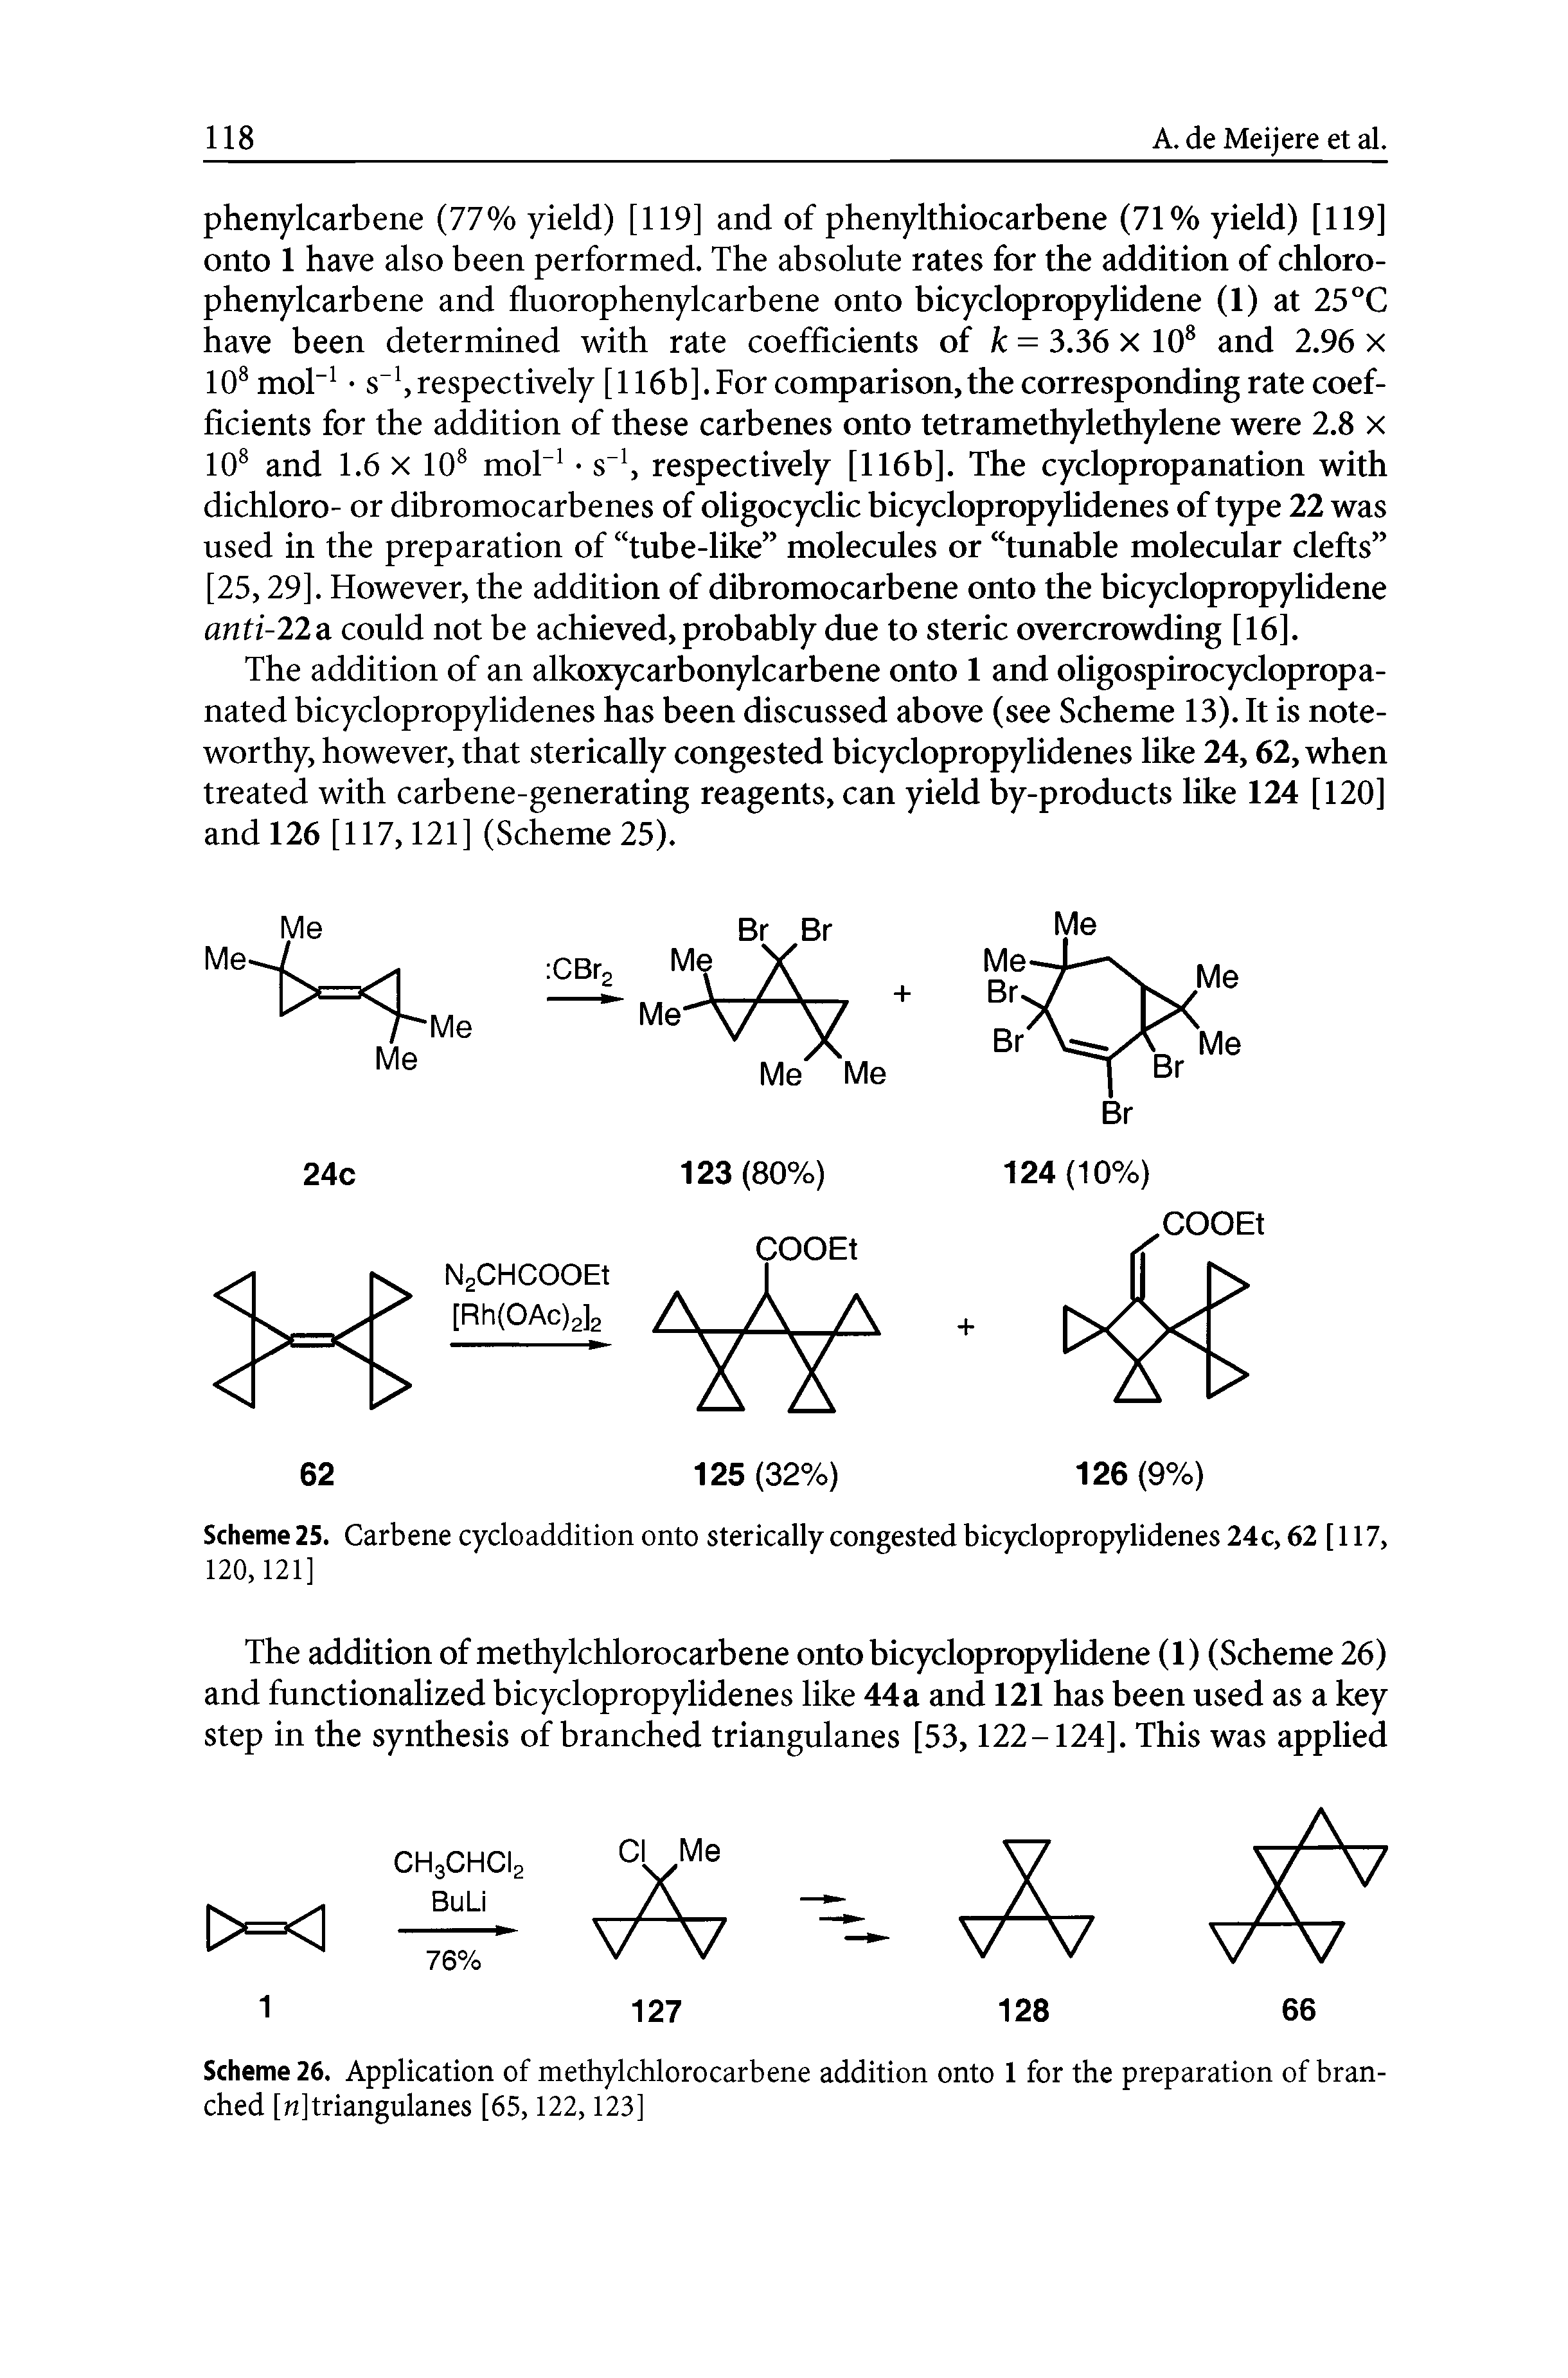 Scheme 26. Application of methylchlorocarbene addition onto 1 for the preparation of branched [n]triangulanes [65,122,123]...